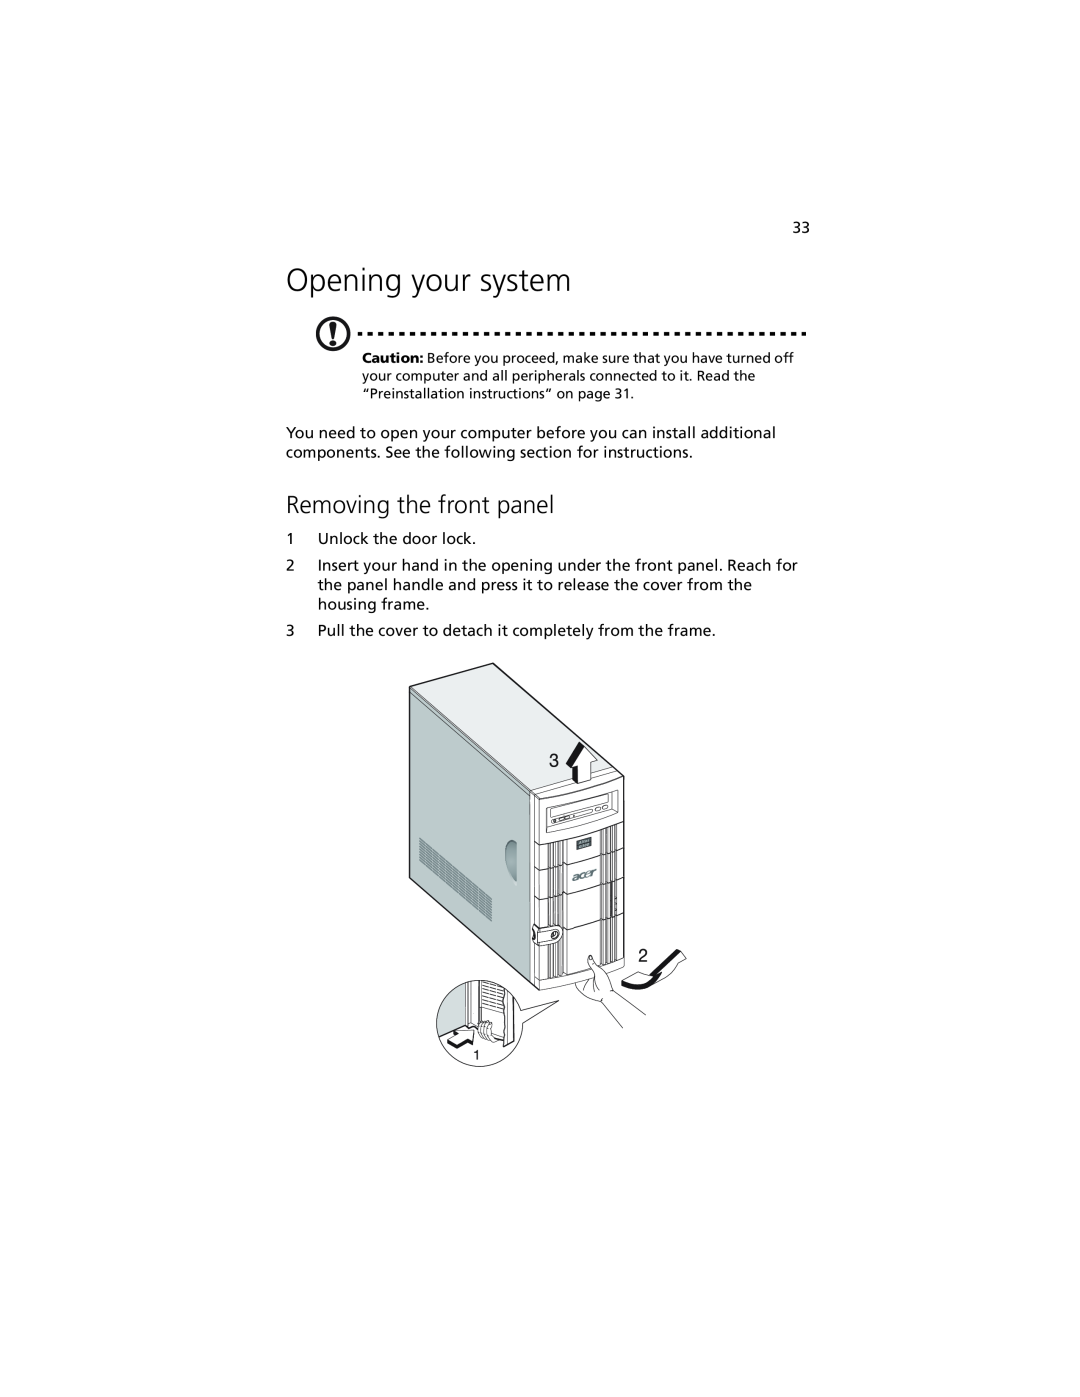 Acer G301 manual Opening your system, Removing the front panel 